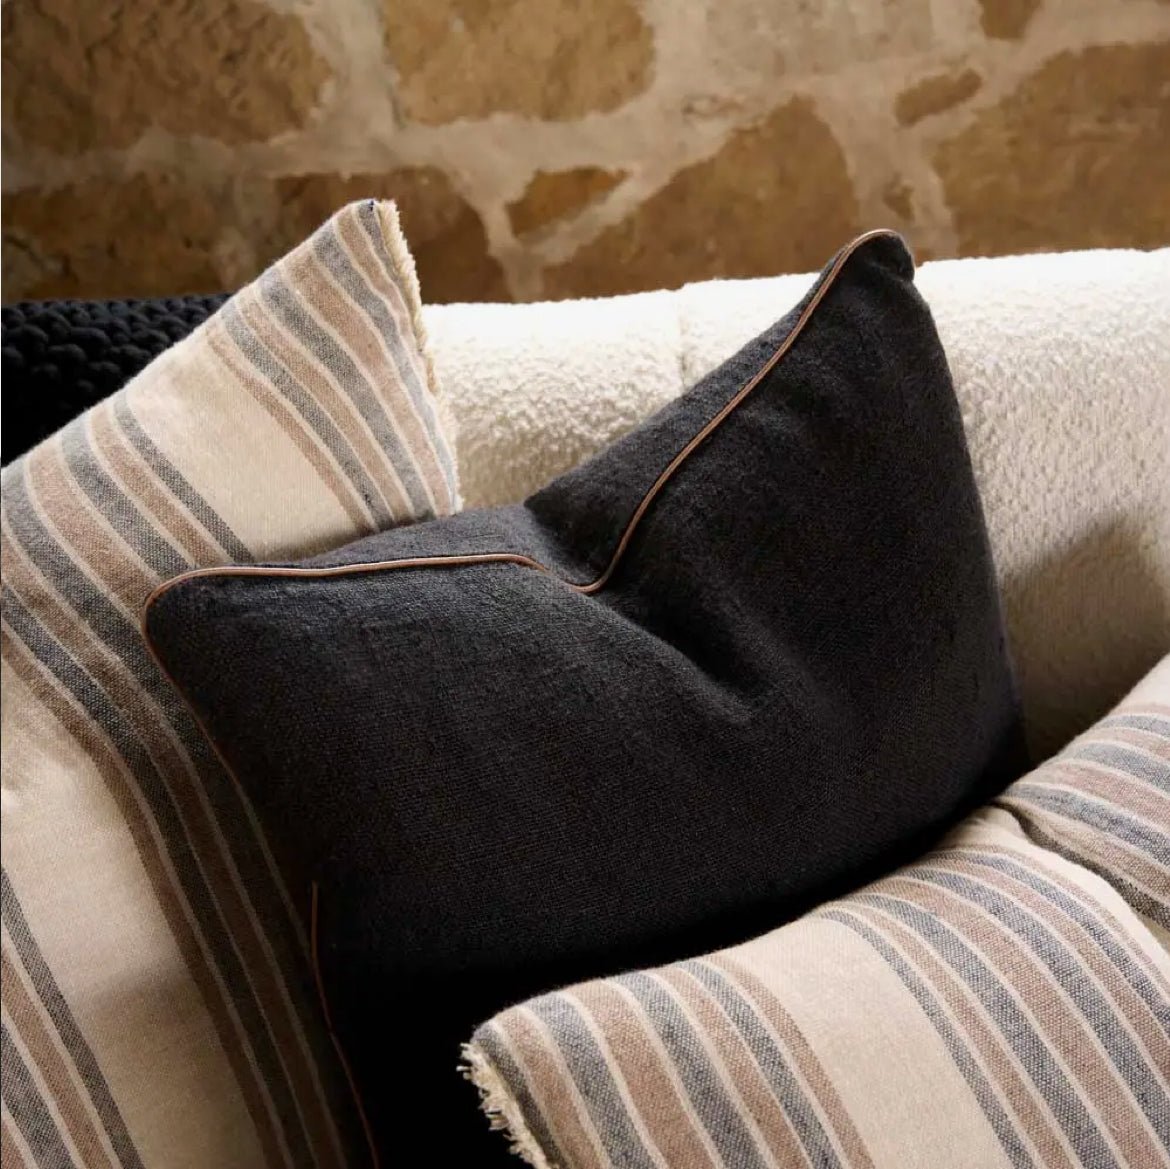 ‘Muse’ Linen Cushion Cover (Black) - EcoLuxe Furnishings